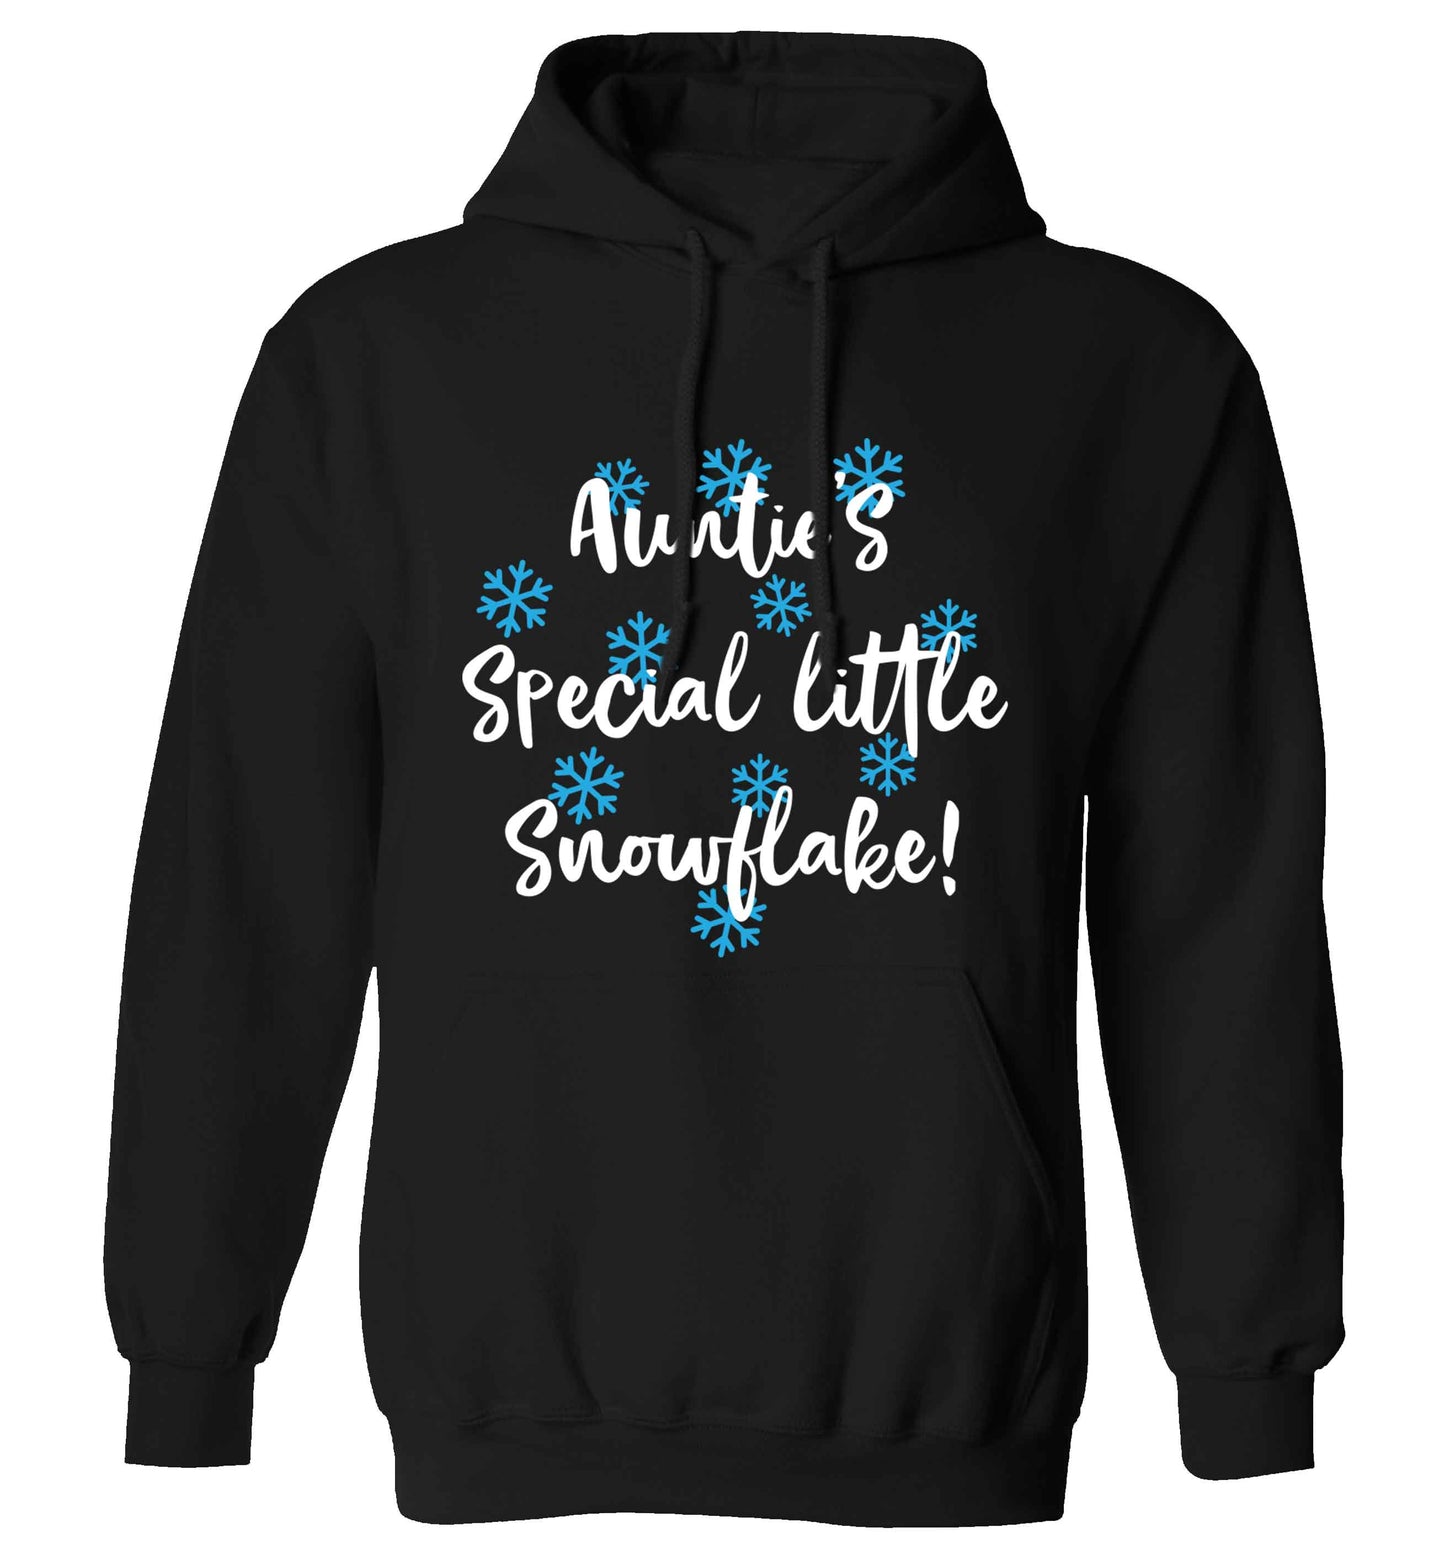 Auntie's special little snowflake adults unisex black hoodie 2XL